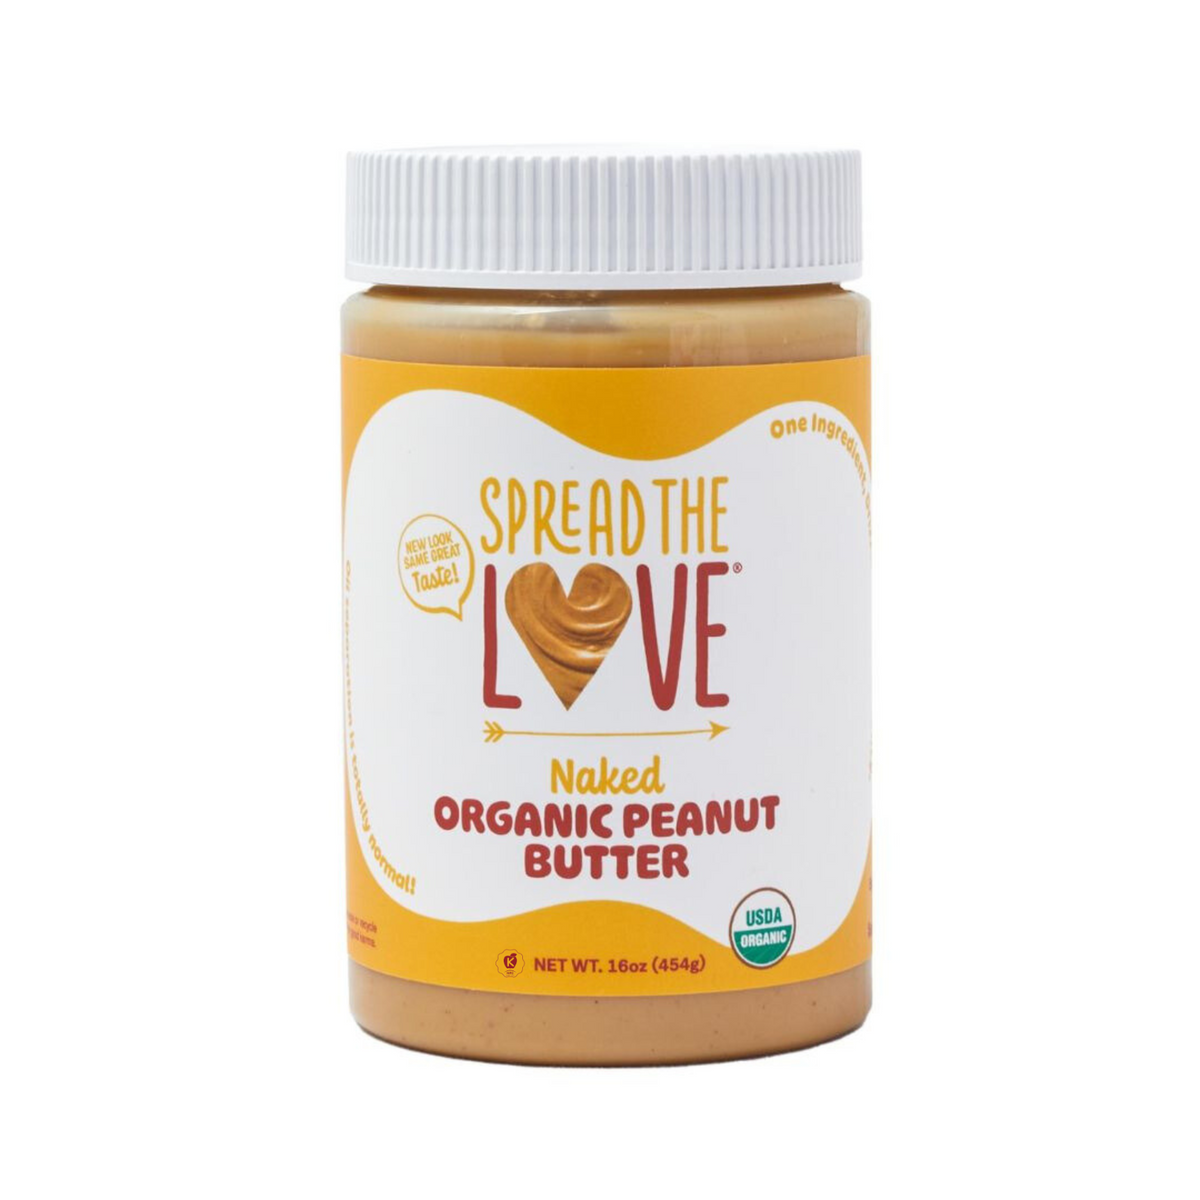 Spread The Love® NAKED Organic Peanut Butter – Spread The Love Foods